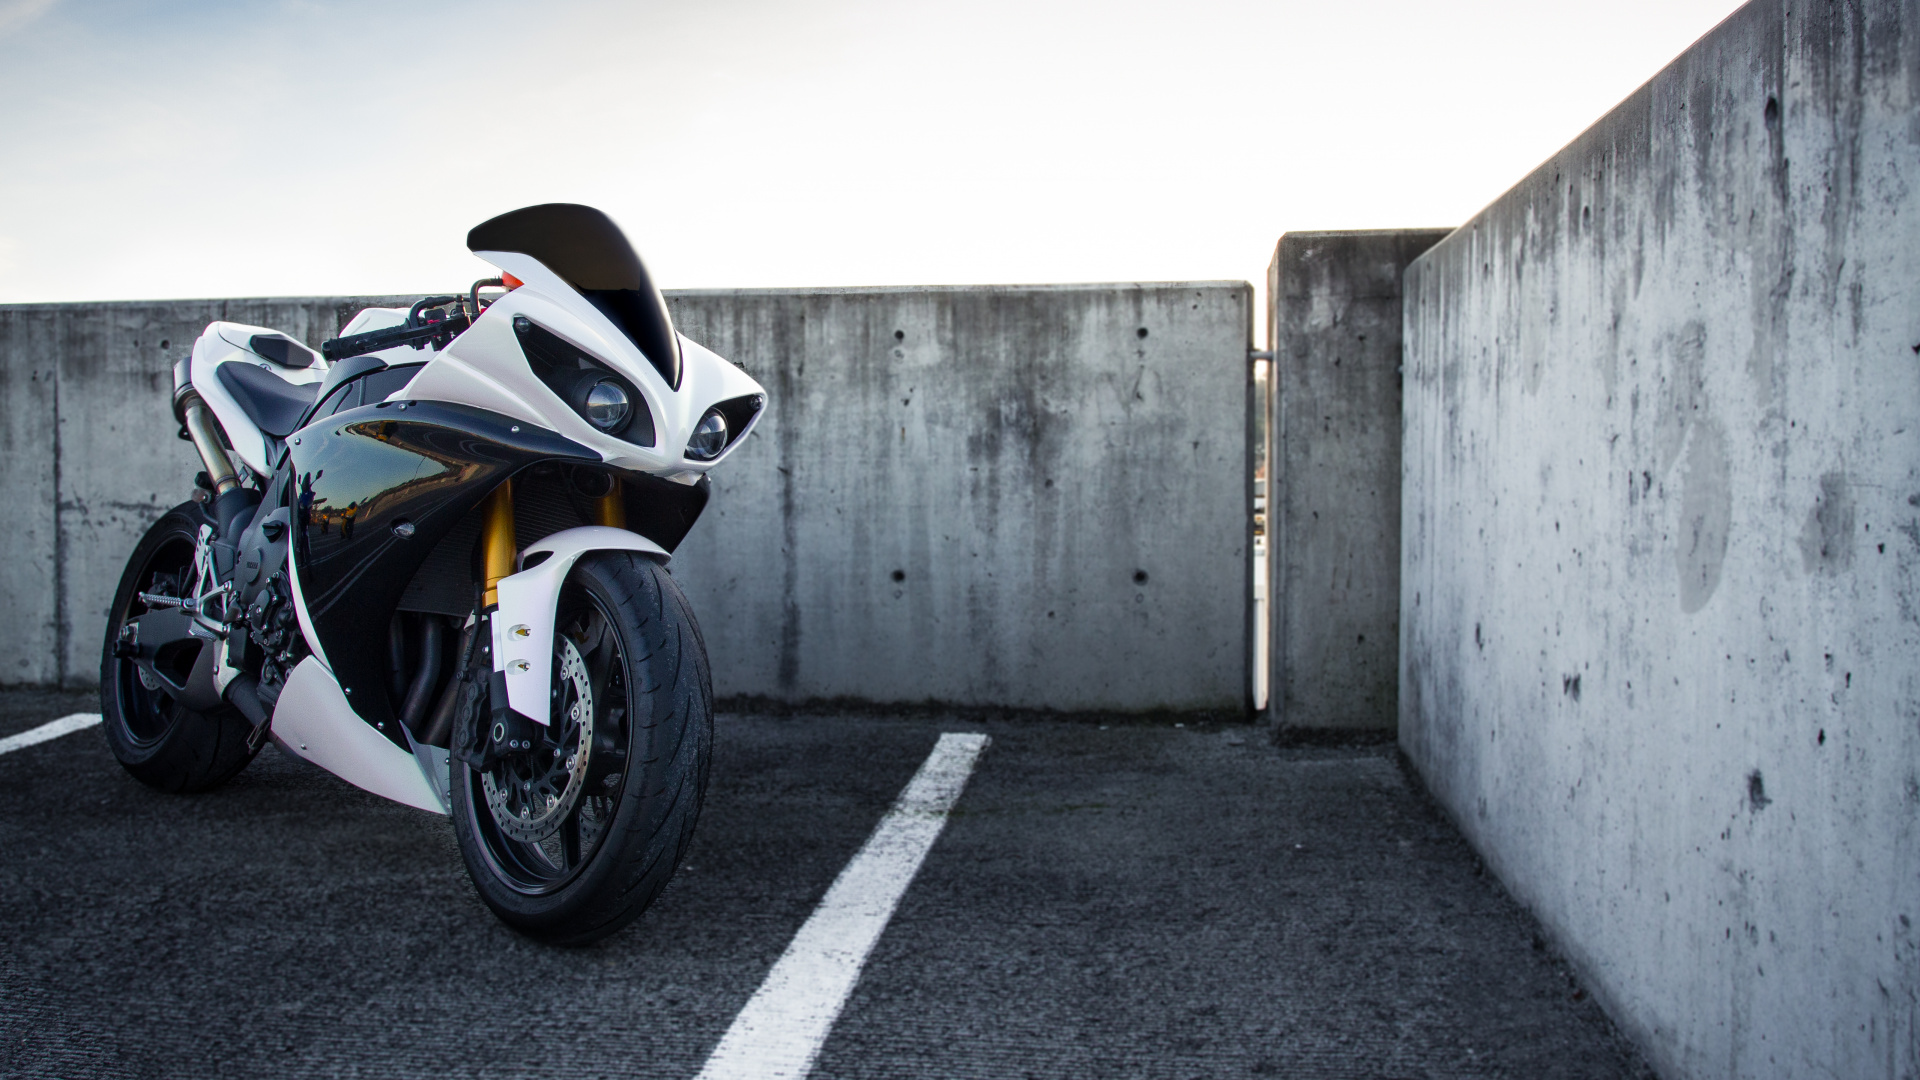 Black and White Sports Bike Parked on Gray Concrete Road During Daytime. Wallpaper in 1920x1080 Resolution